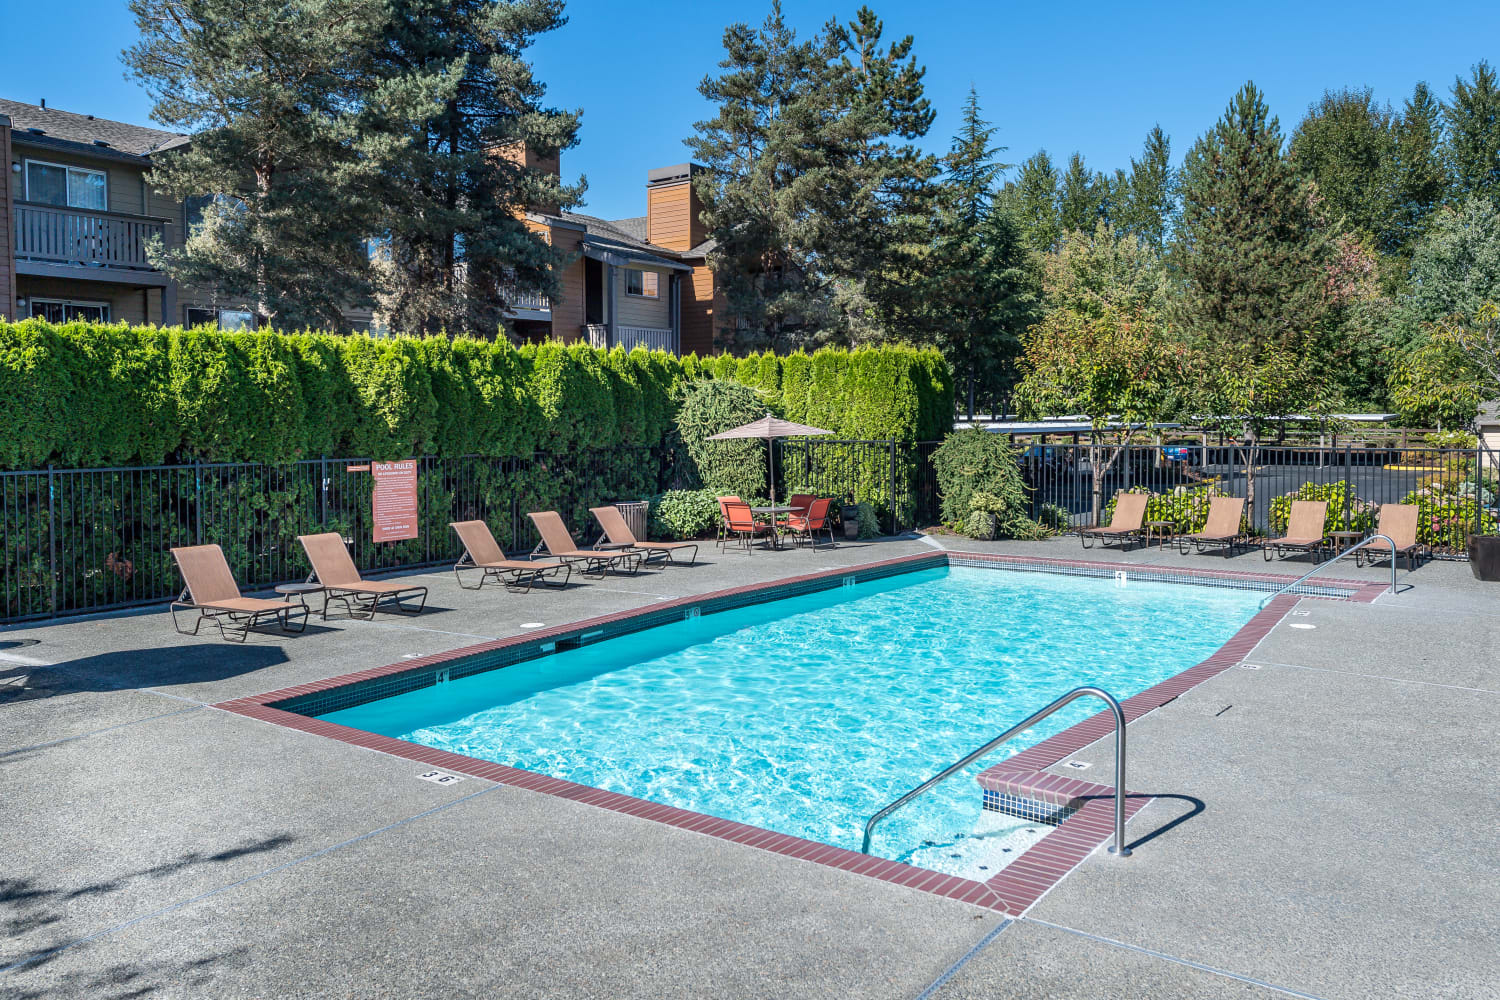 Swimming pool at Campbell Run Apartments in Woodinville, Washington